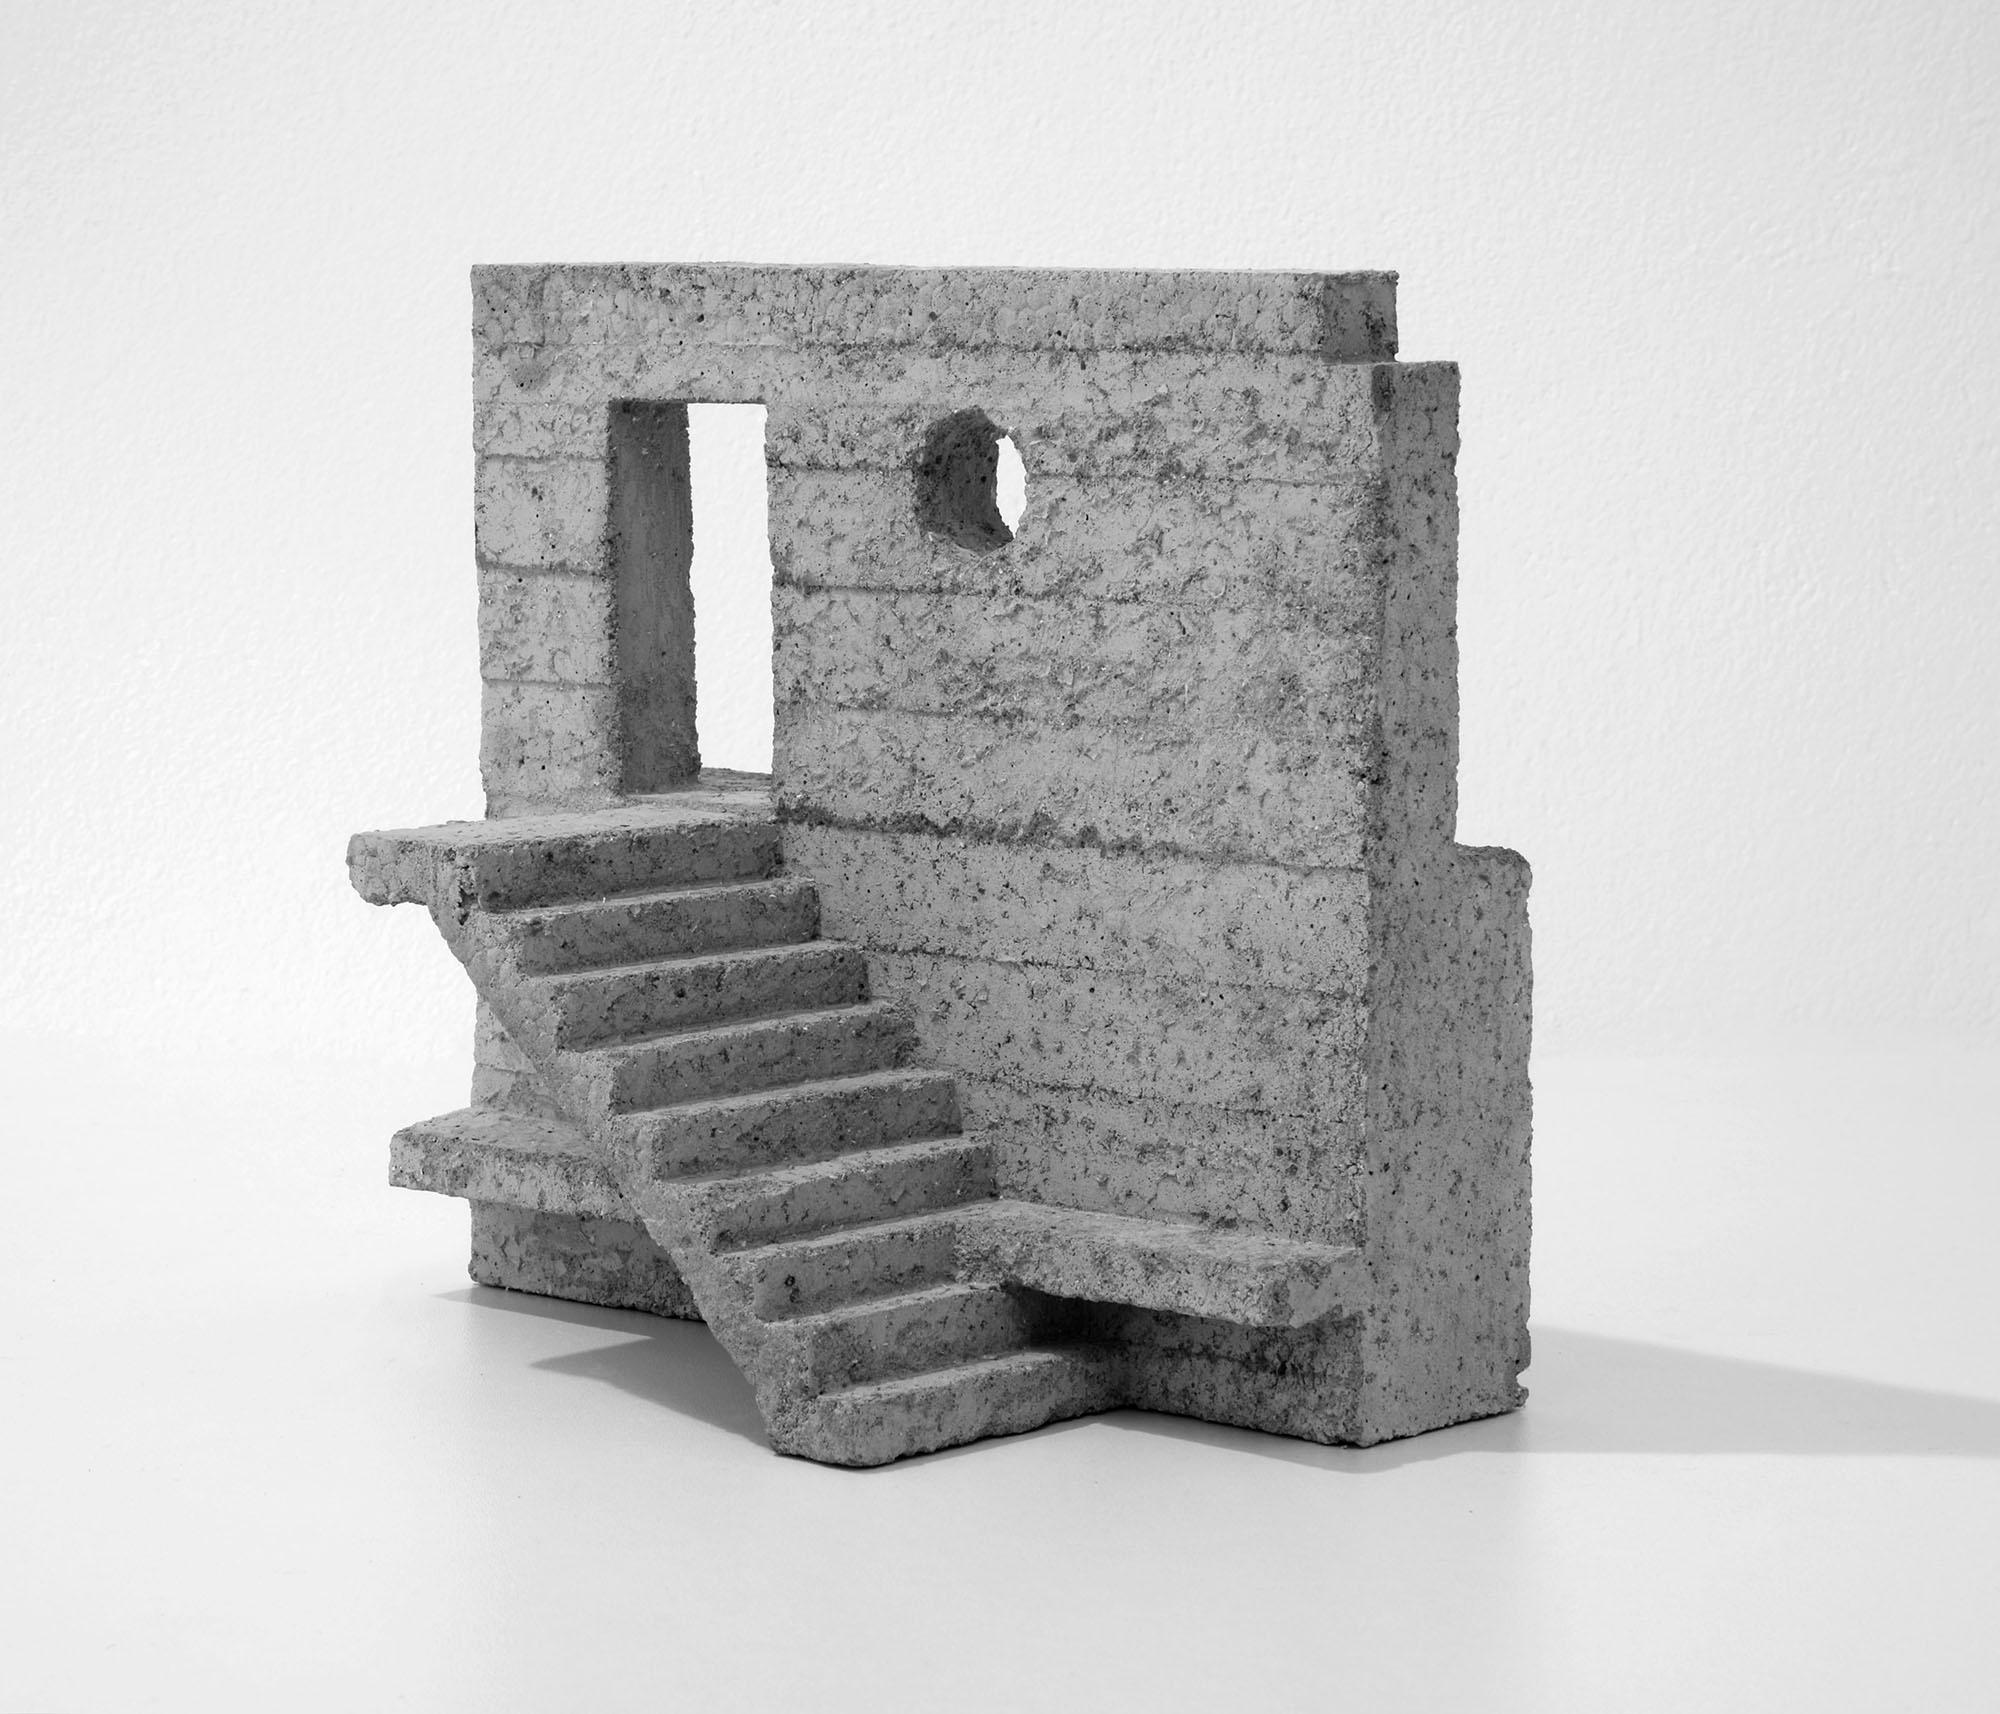 Minimalist Abstract Contemporary Sculpture In Concrete 